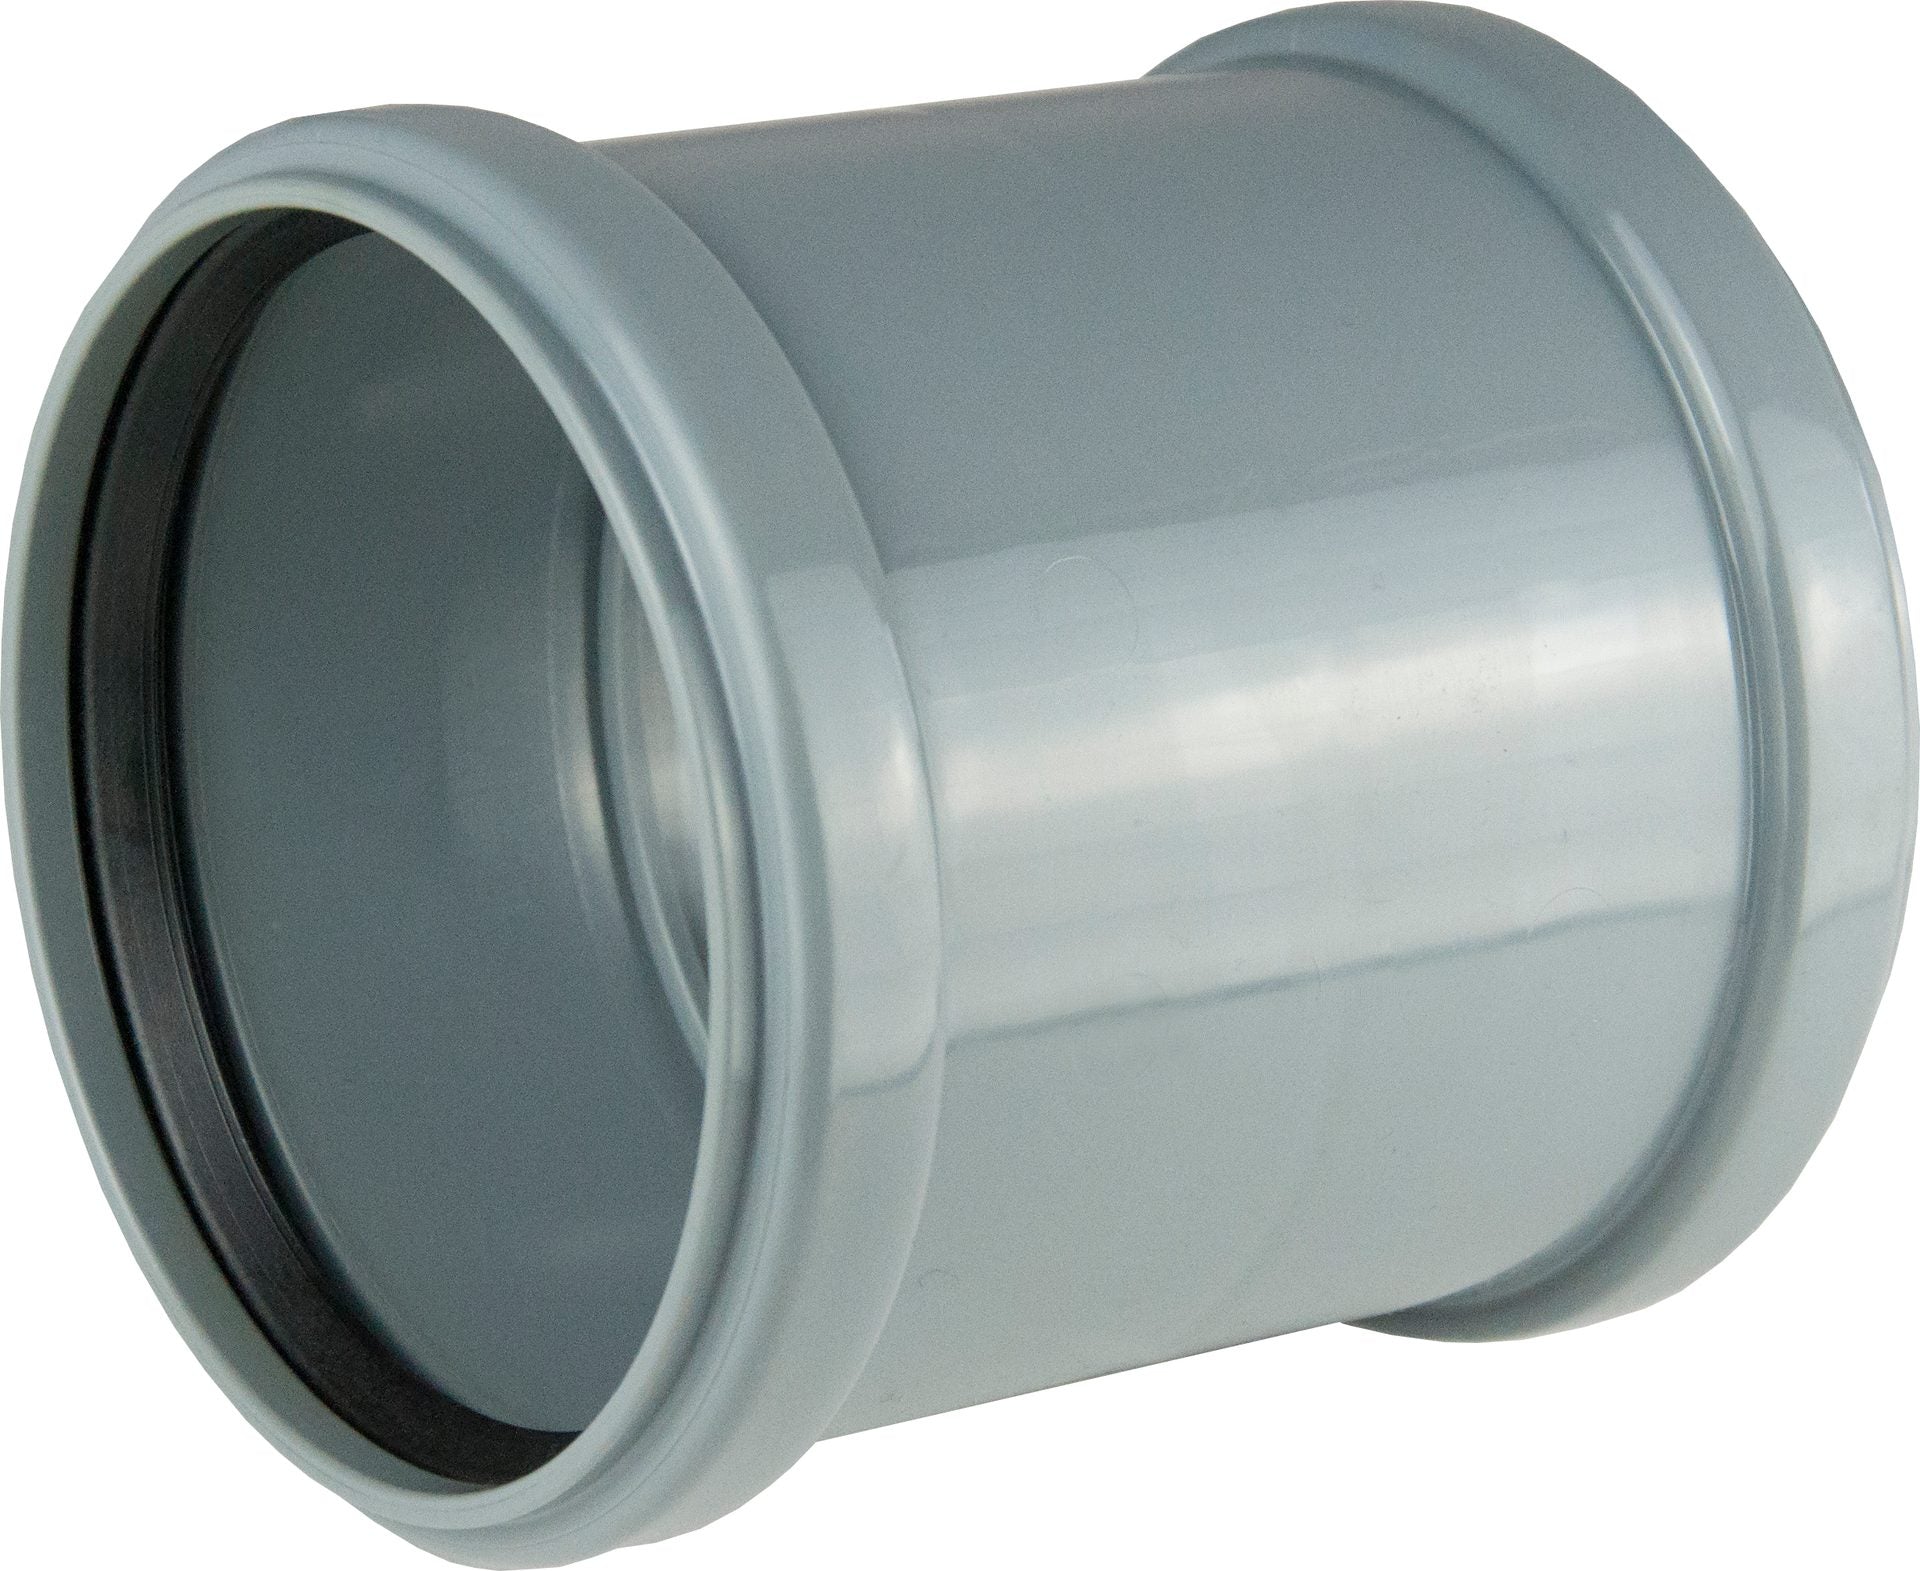 Coupler for Indoor drainage Kaczmarek Fonica PP HT Grey with central stop